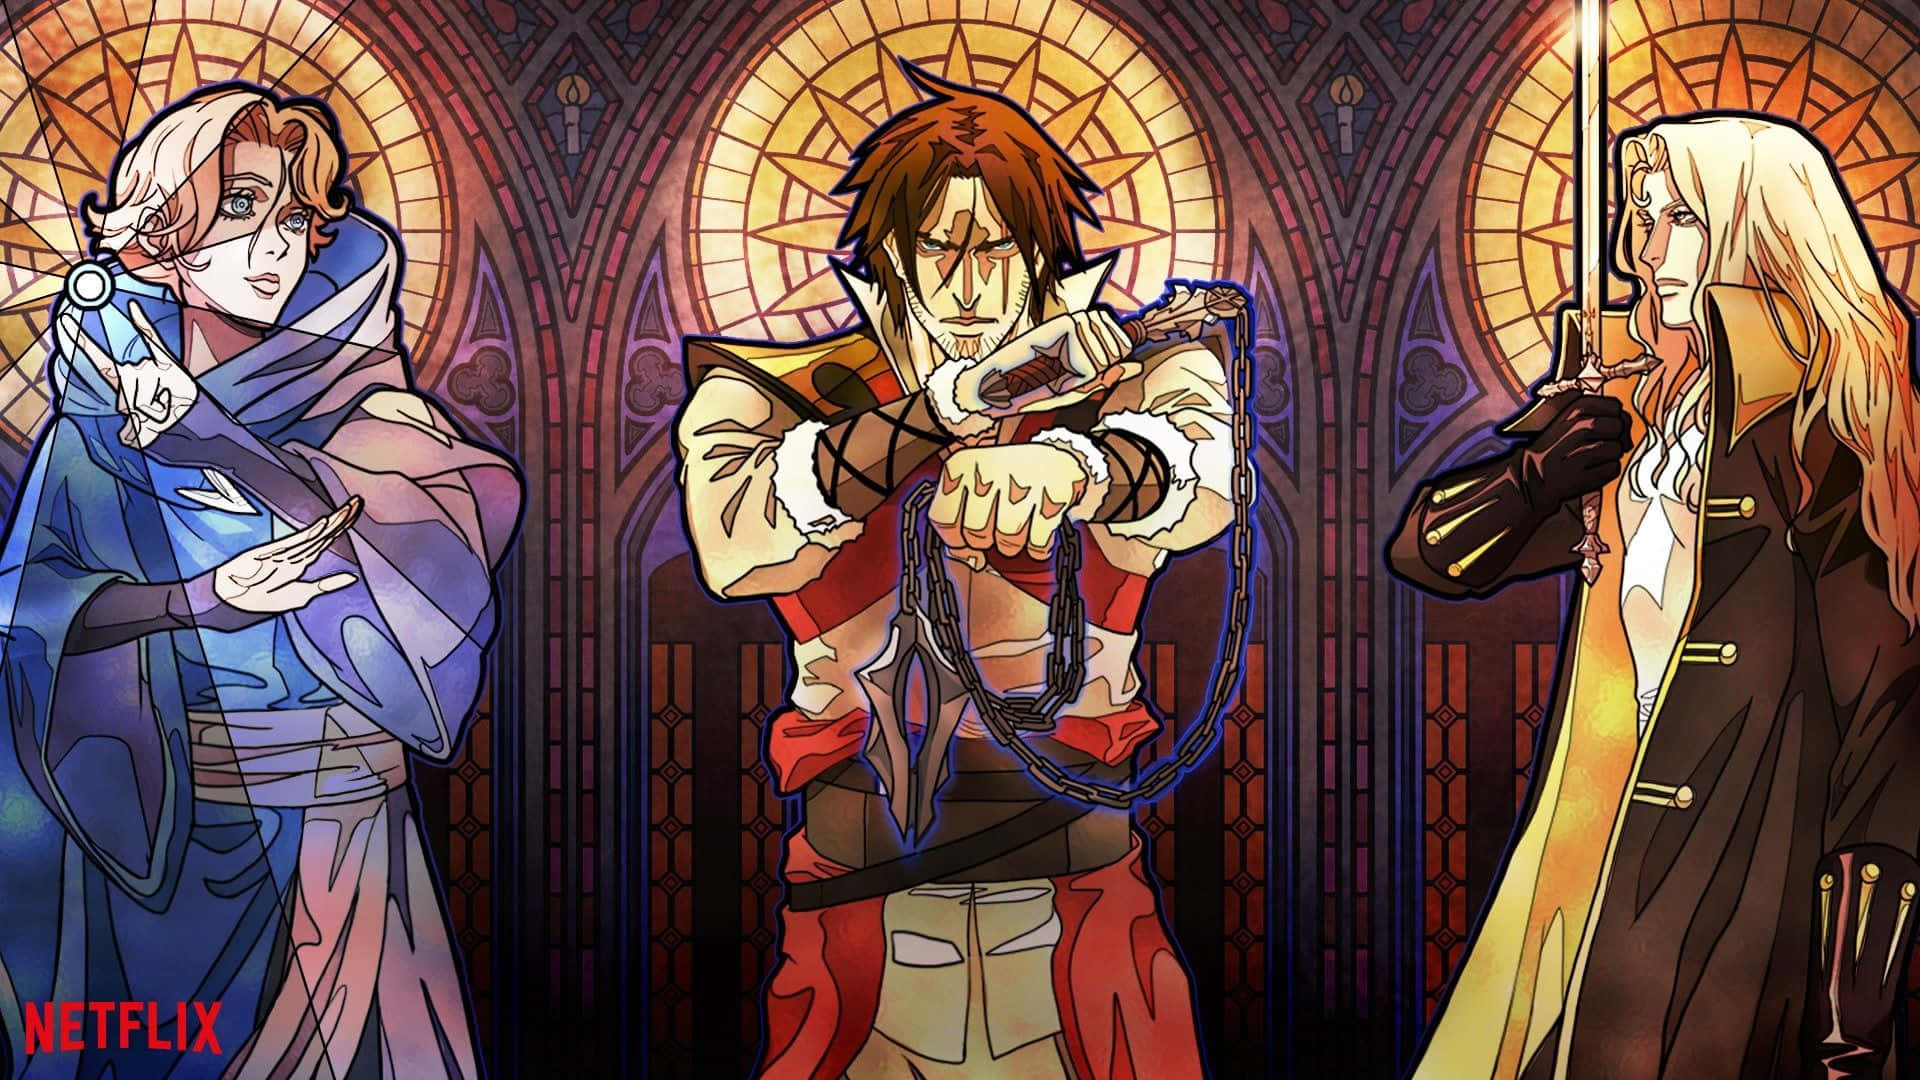 Caption: Castlevania Sypha Belnades In Magical Action Wallpaper